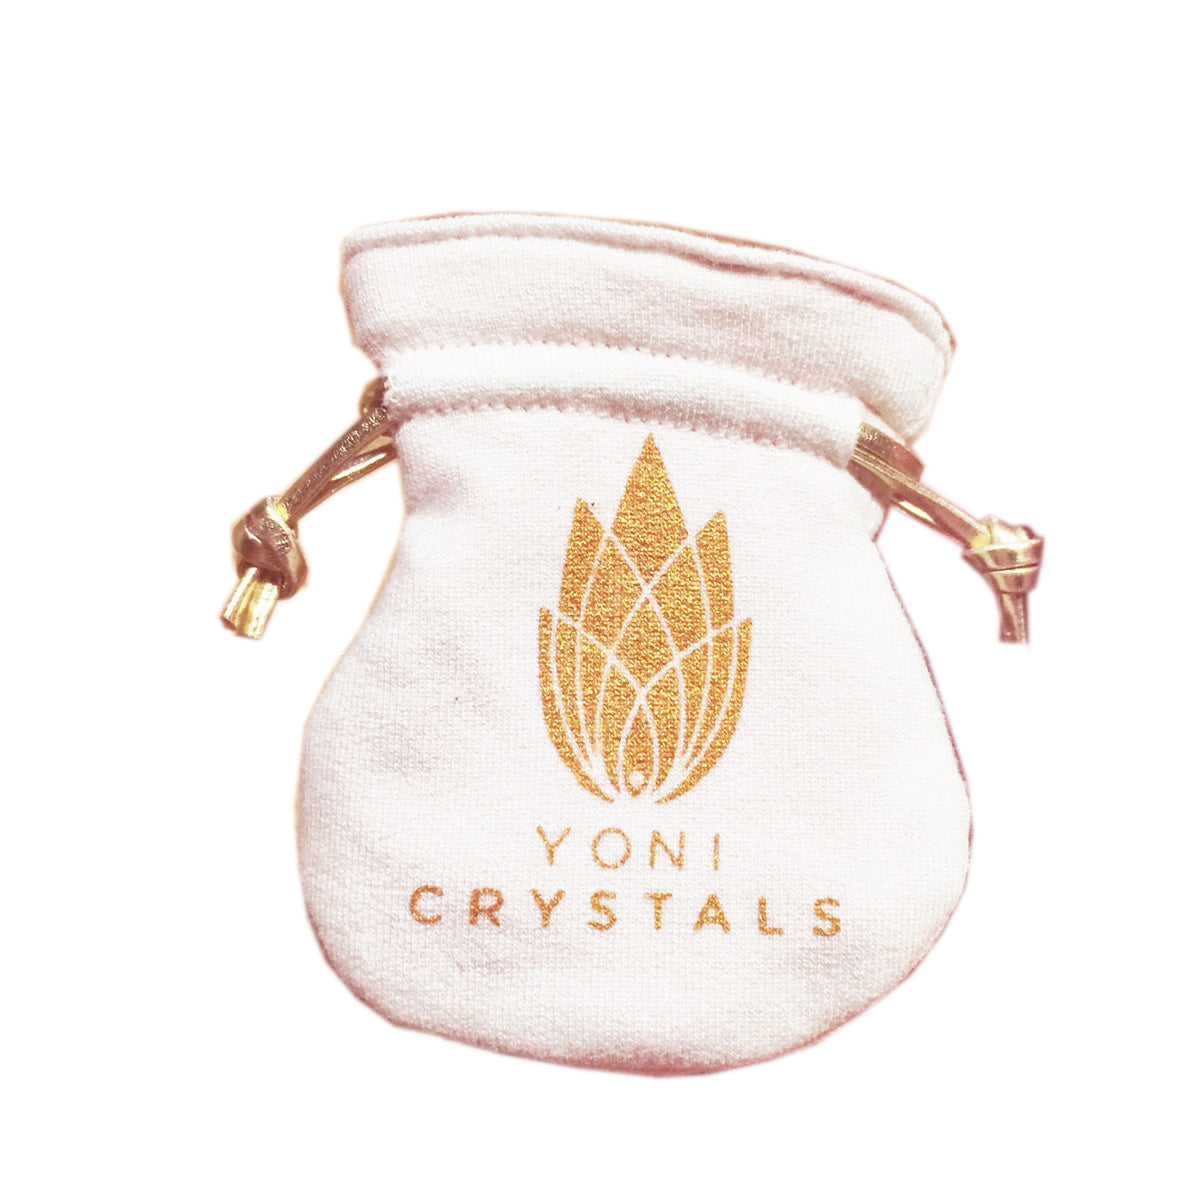 Yoni Crystals Egg Pouch